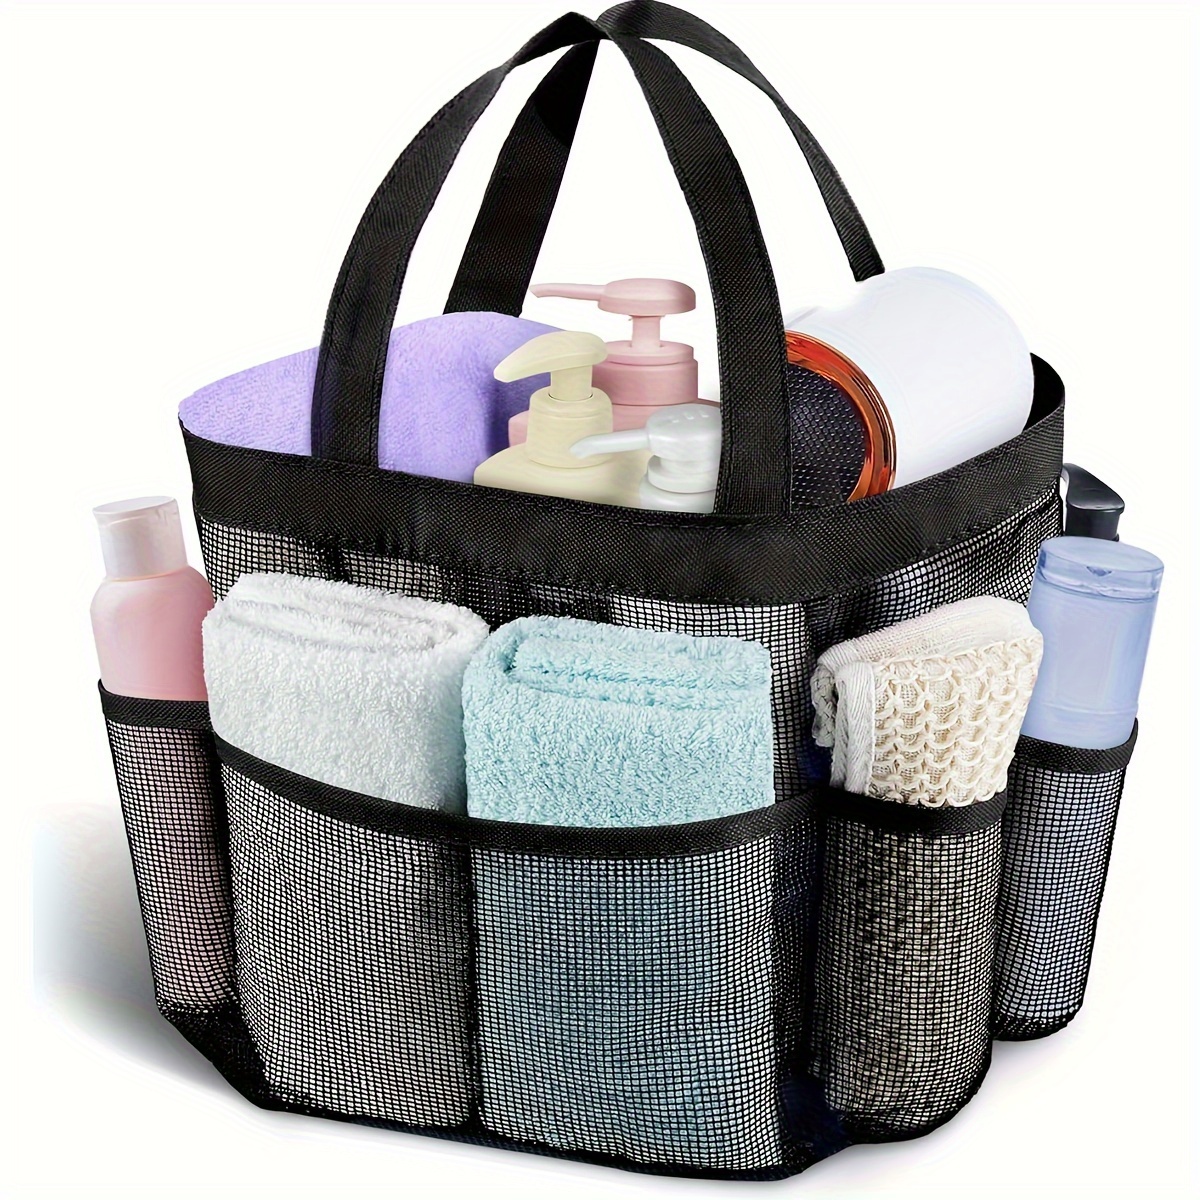 

Travel Bag, Portable And Hanging Shower Tote Bag With 8 Mesh Compartments, Essential For College Dorms, Suitable For Large Capacity Showering In Dorms, Ideal For Bathrooms